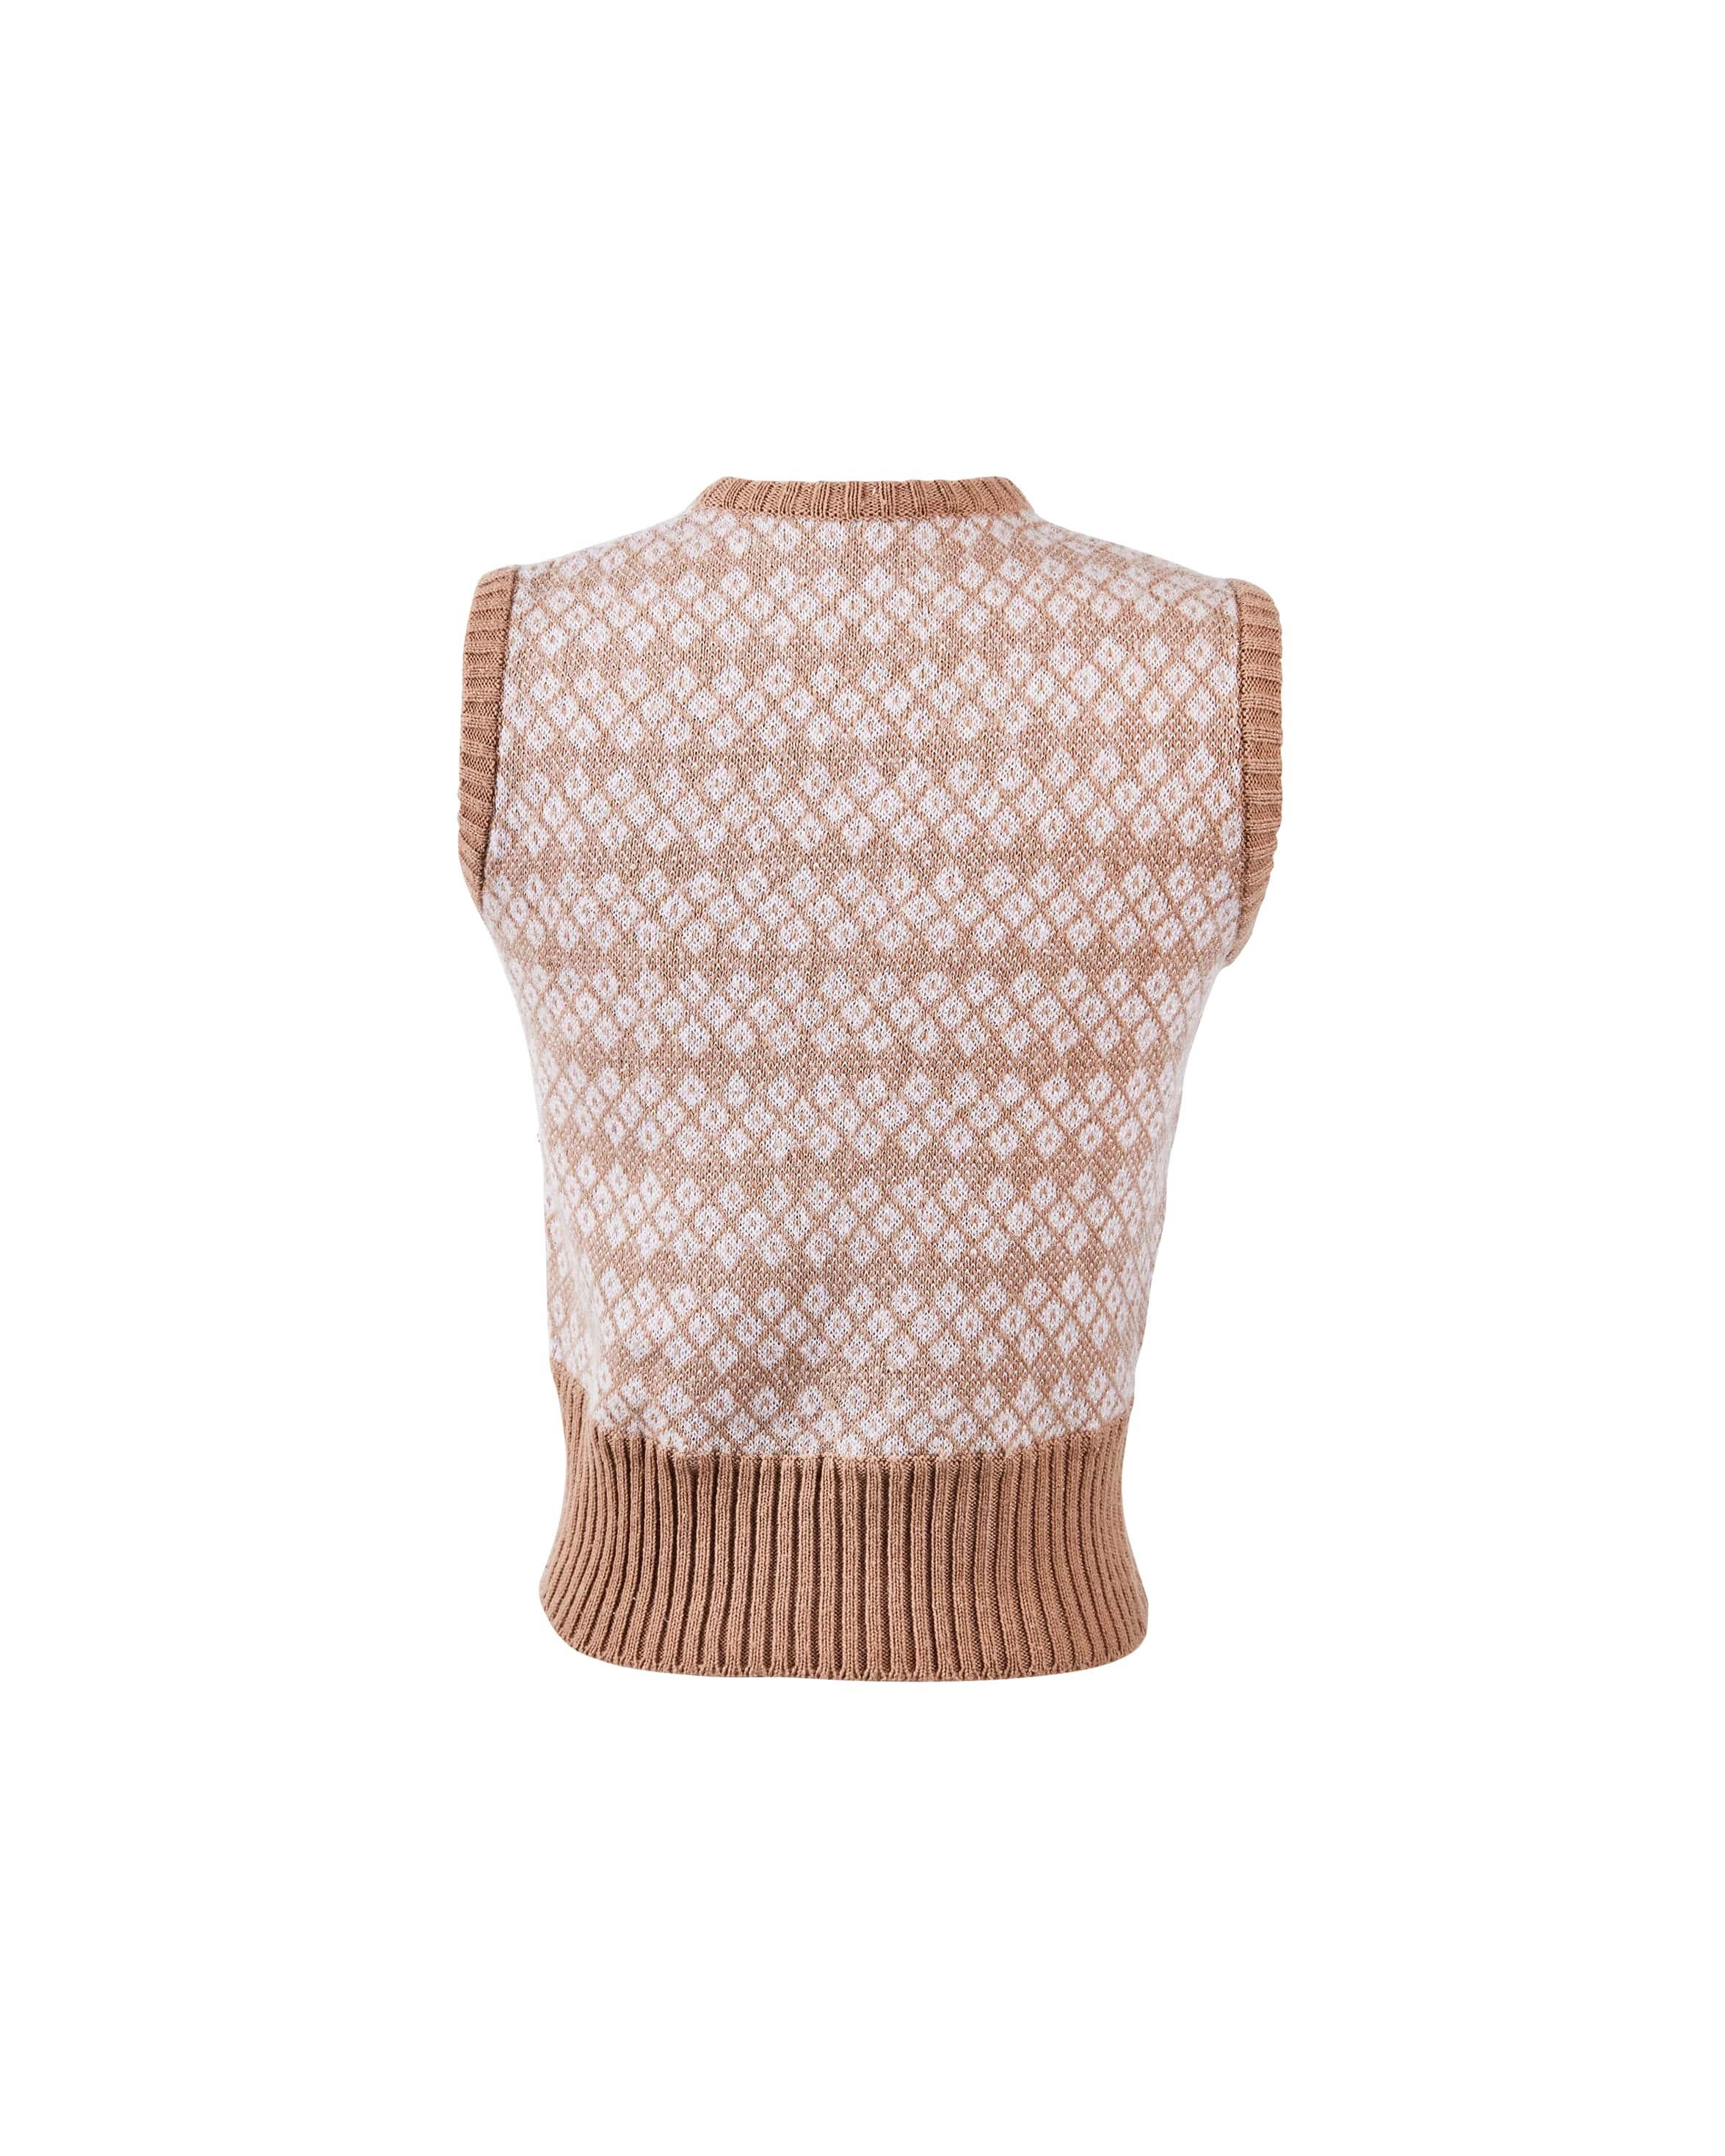 1970's Special Vintage cream and brown cropped knit sweater vest. Sleeveless sweater with lattice pattern throughout. 
